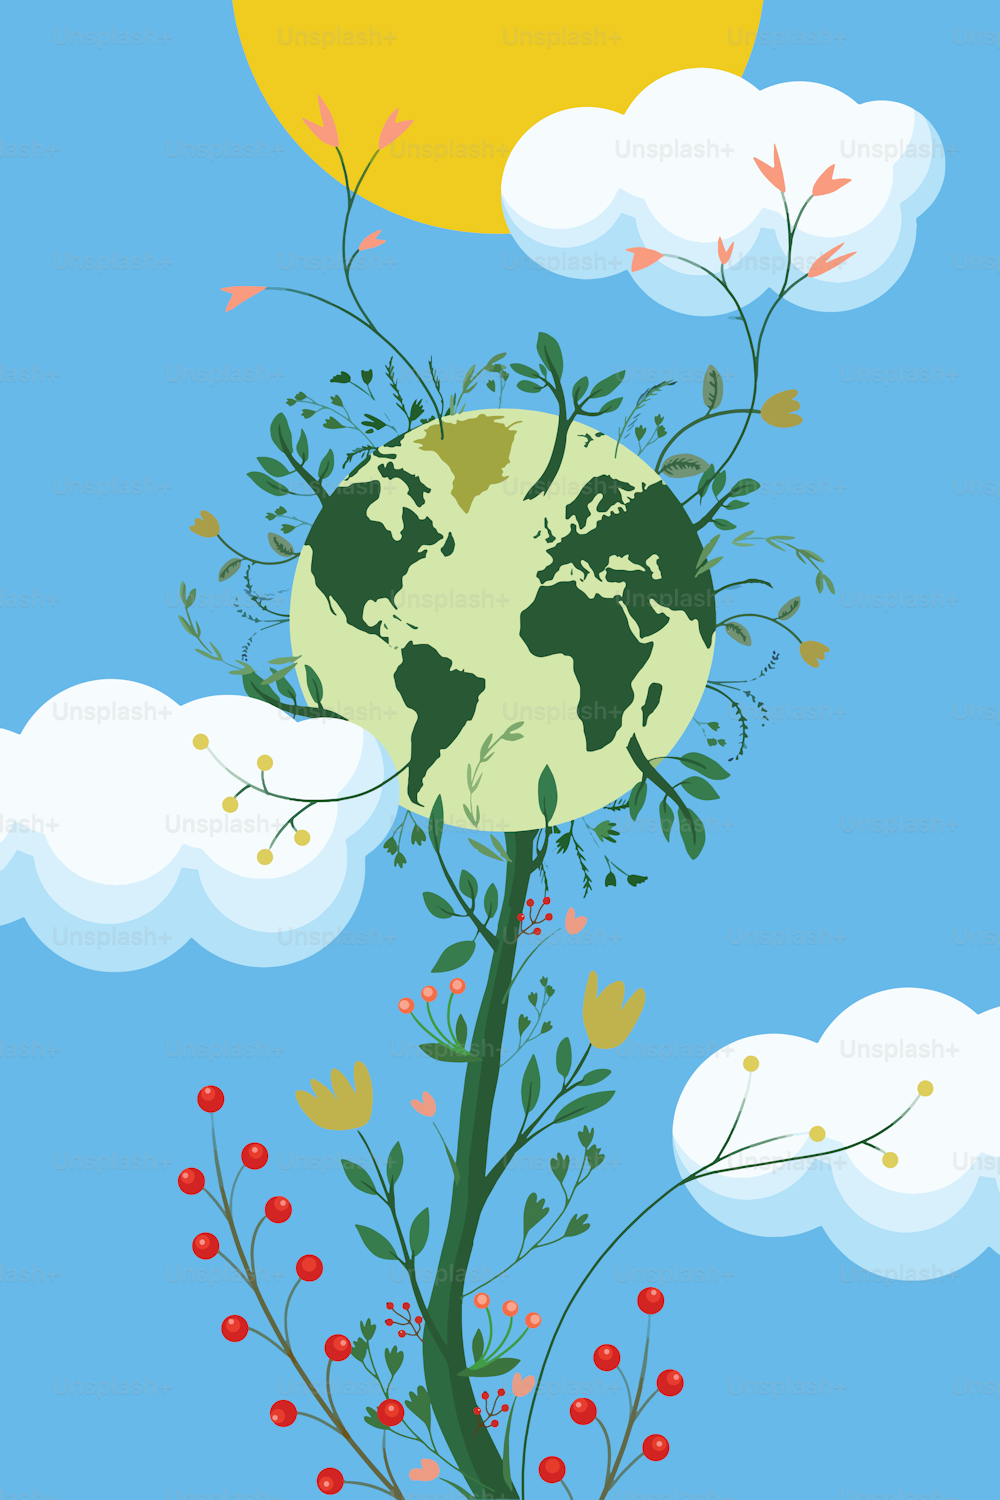 Concept of Arbor Day